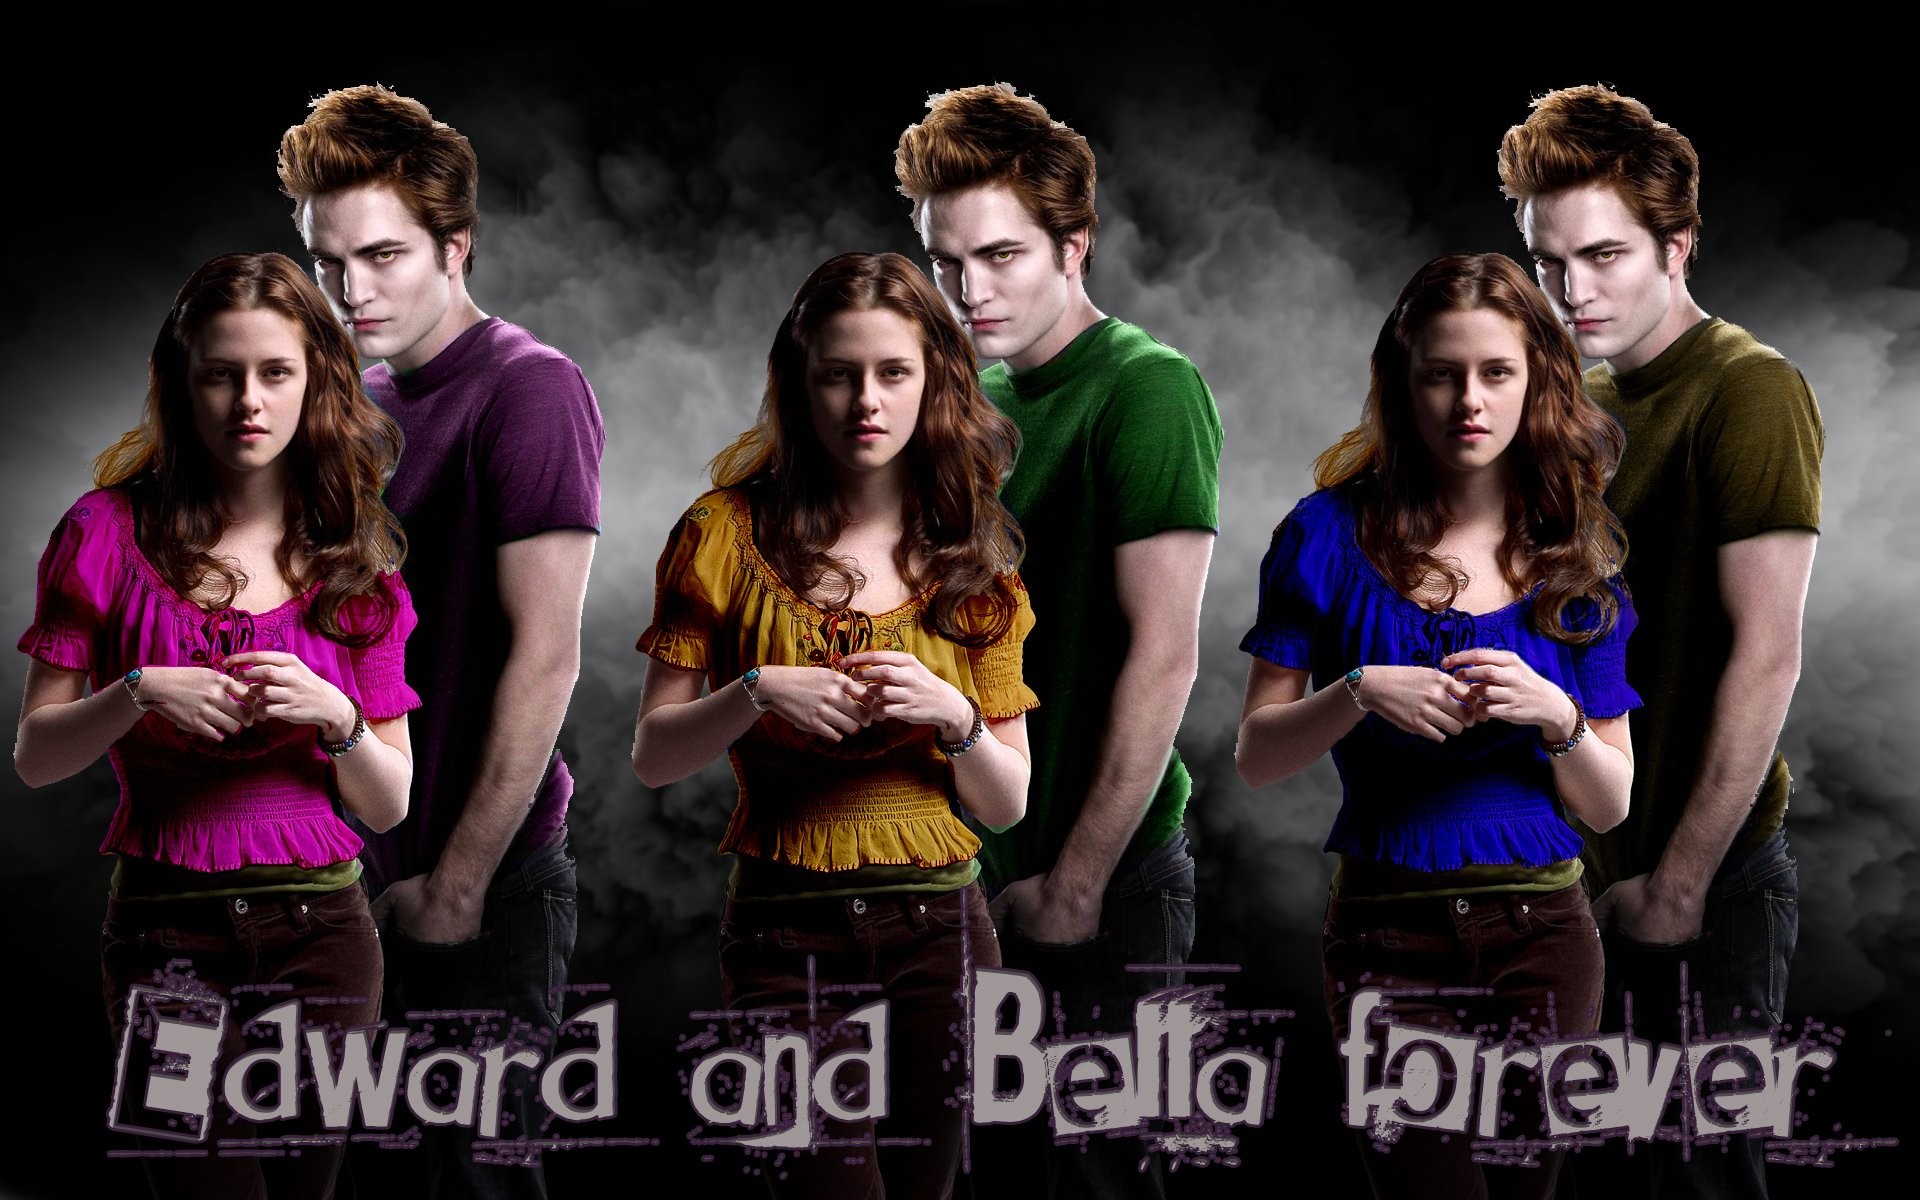 1920x1200 Free Twilight Wallpapers and Screensavers